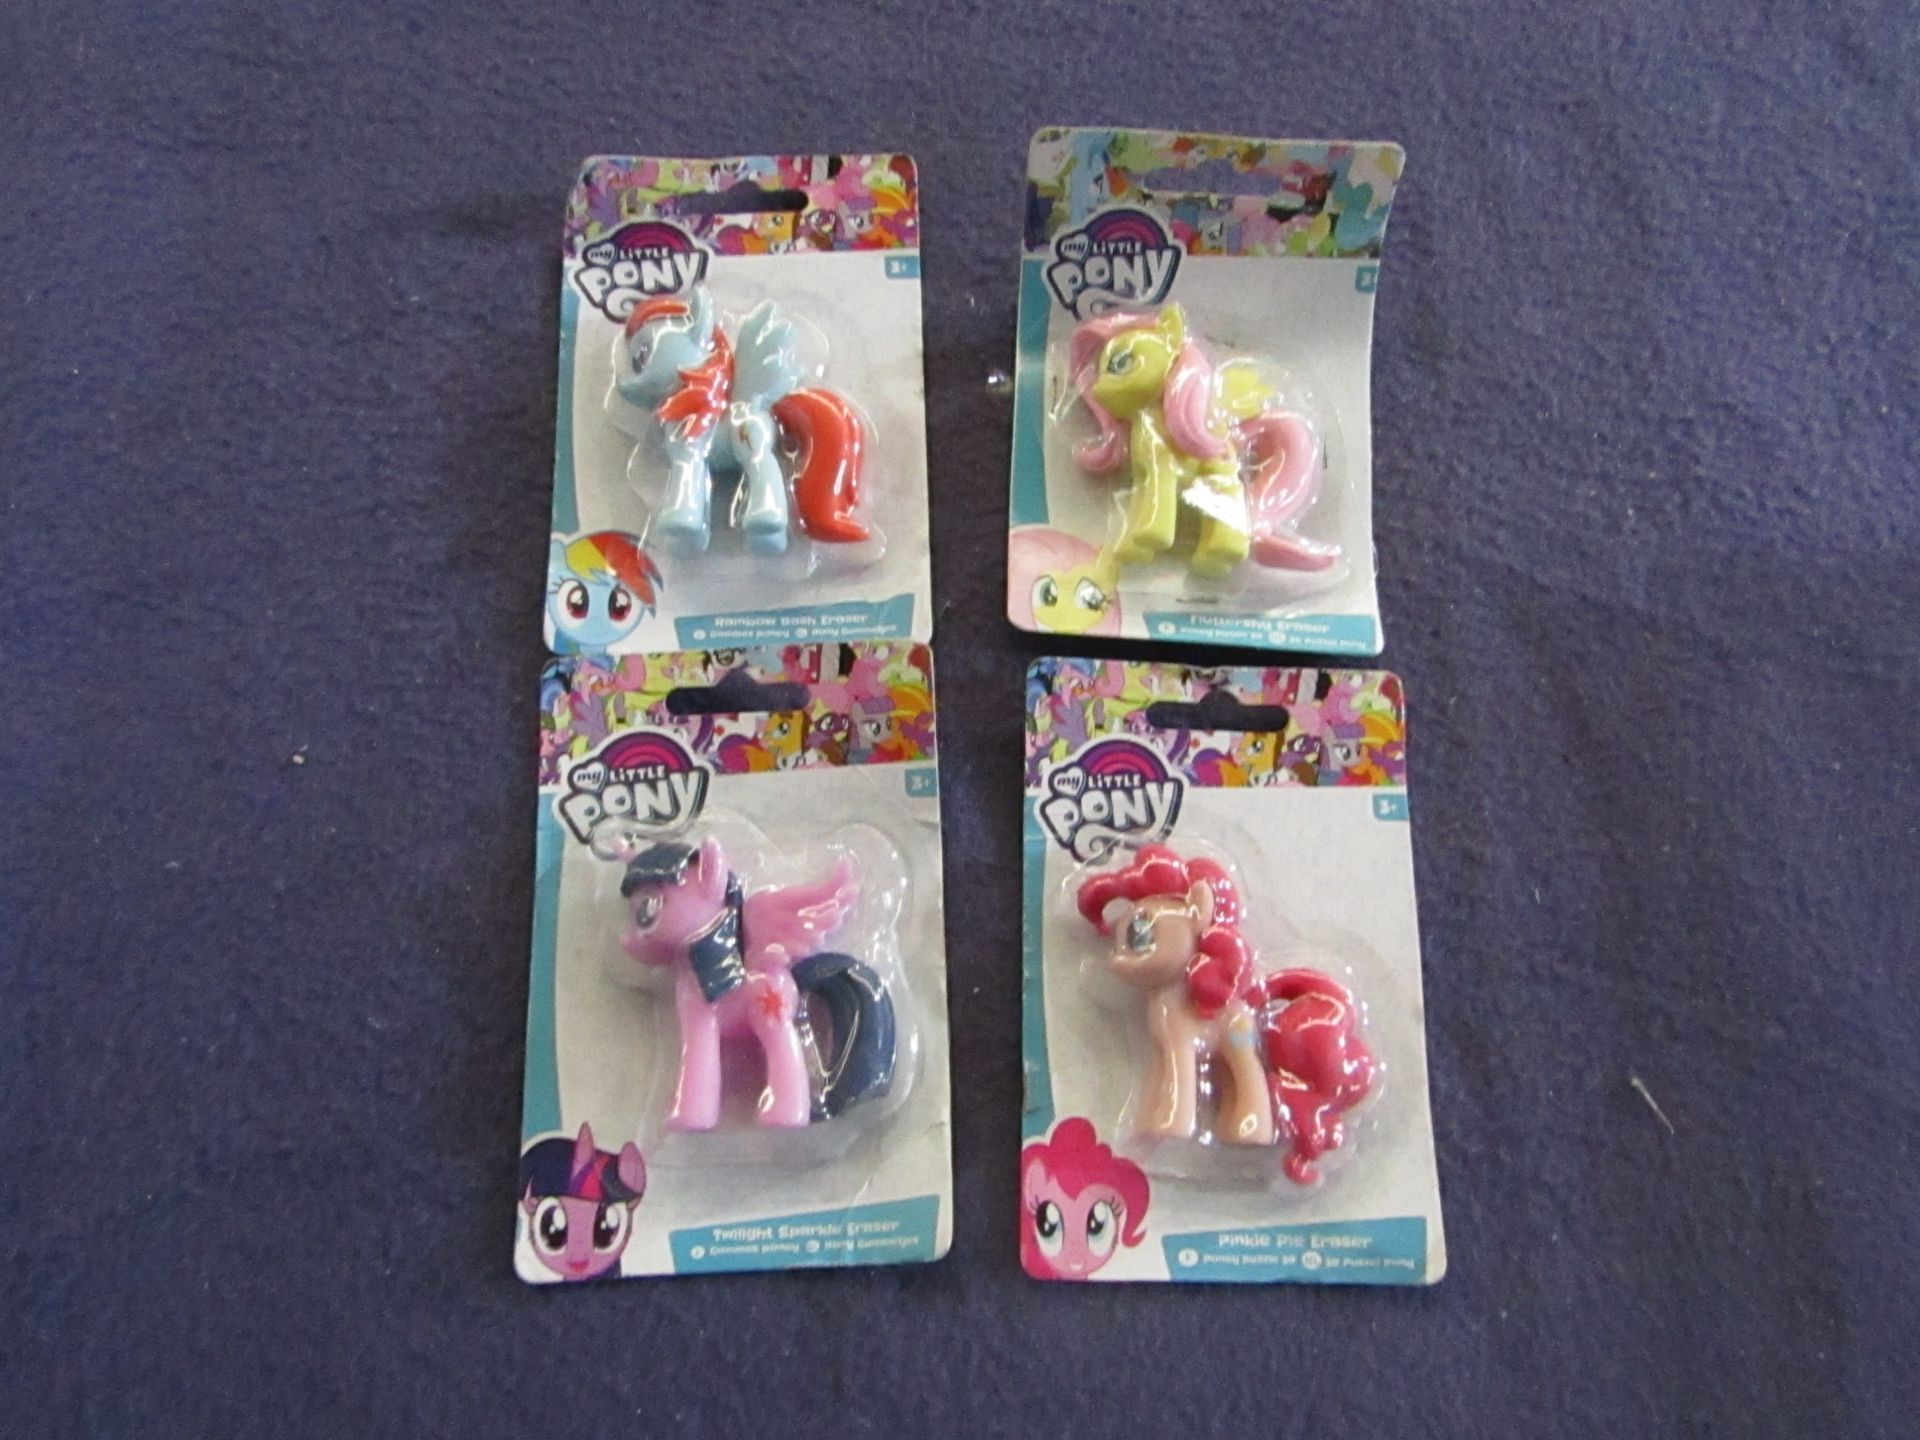 6x My Little Pony - Assorted 3D Erasers - All Unused & Packaged.